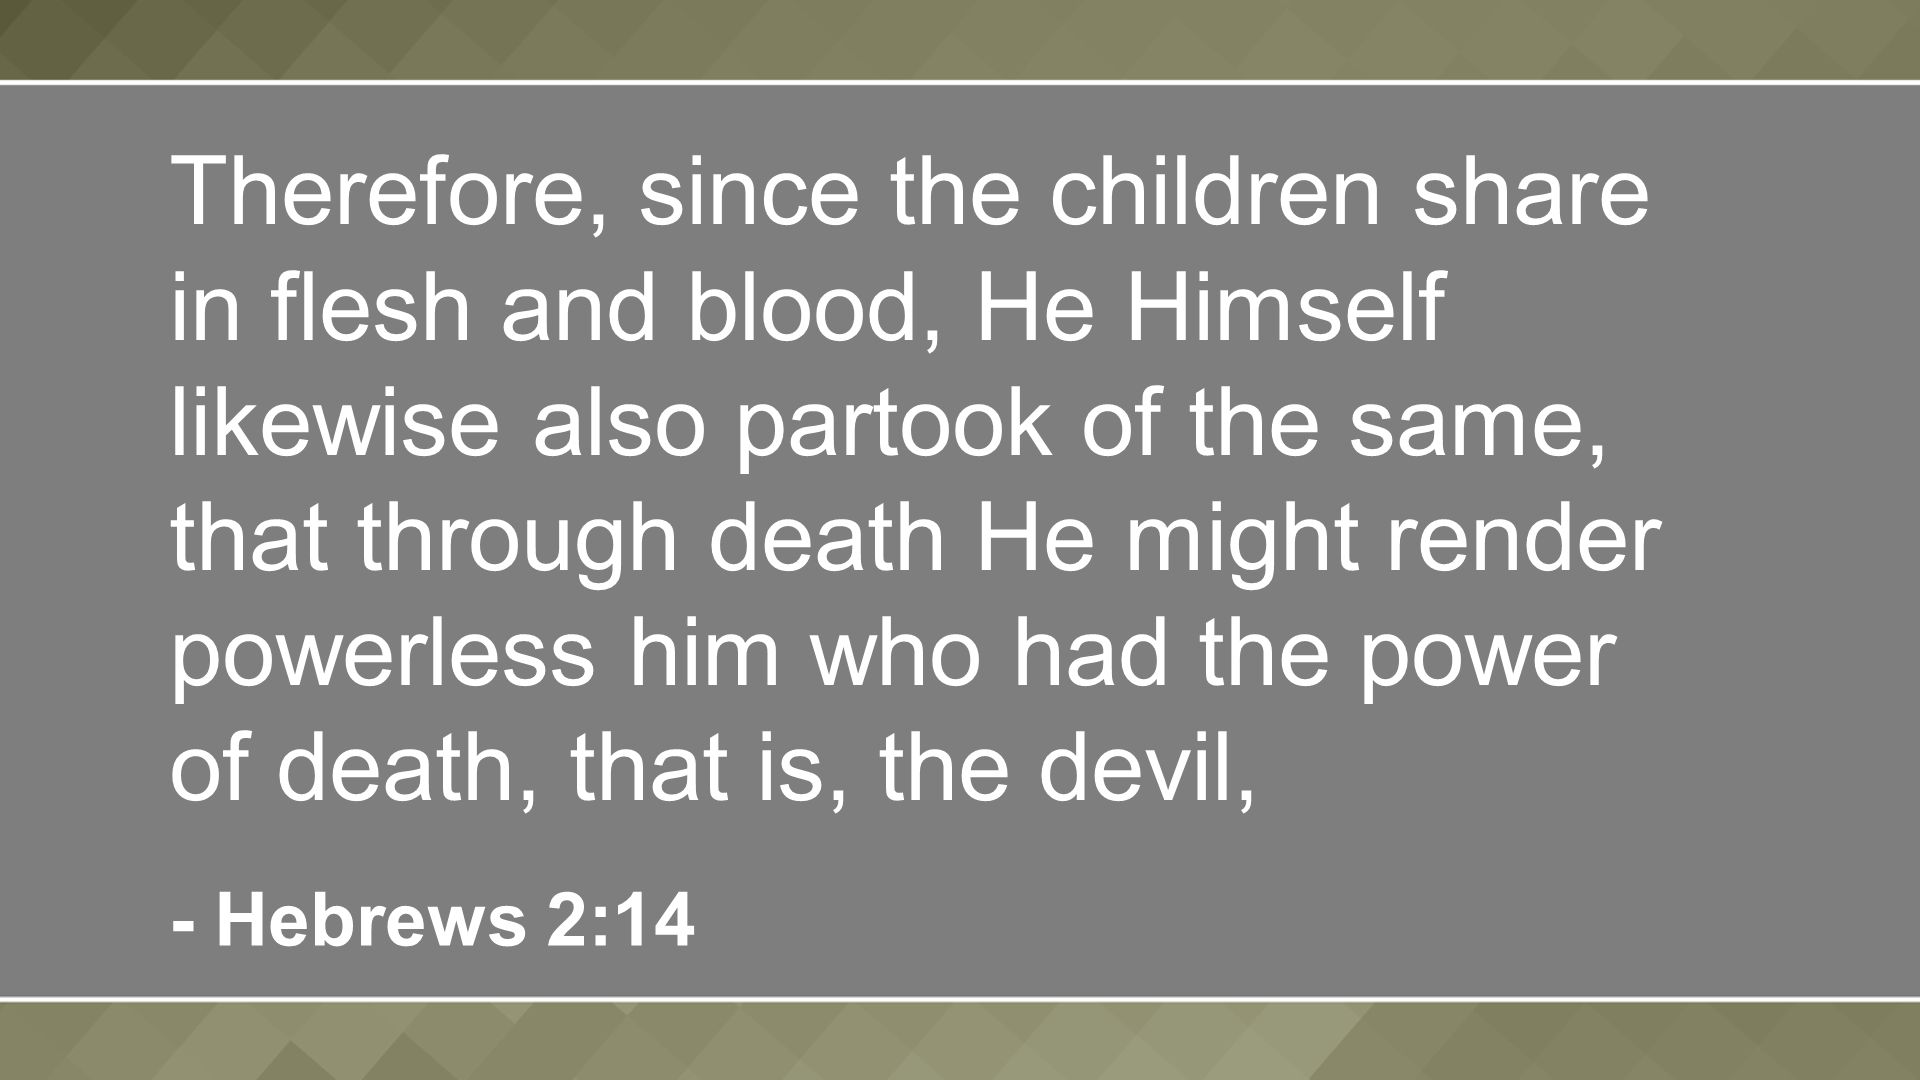 Therefore, since the children share in flesh and blood, He Himself likewise also partook of the same, that through death He might render powerless him who had the power of death, that is, the devil, - Hebrews 2:14